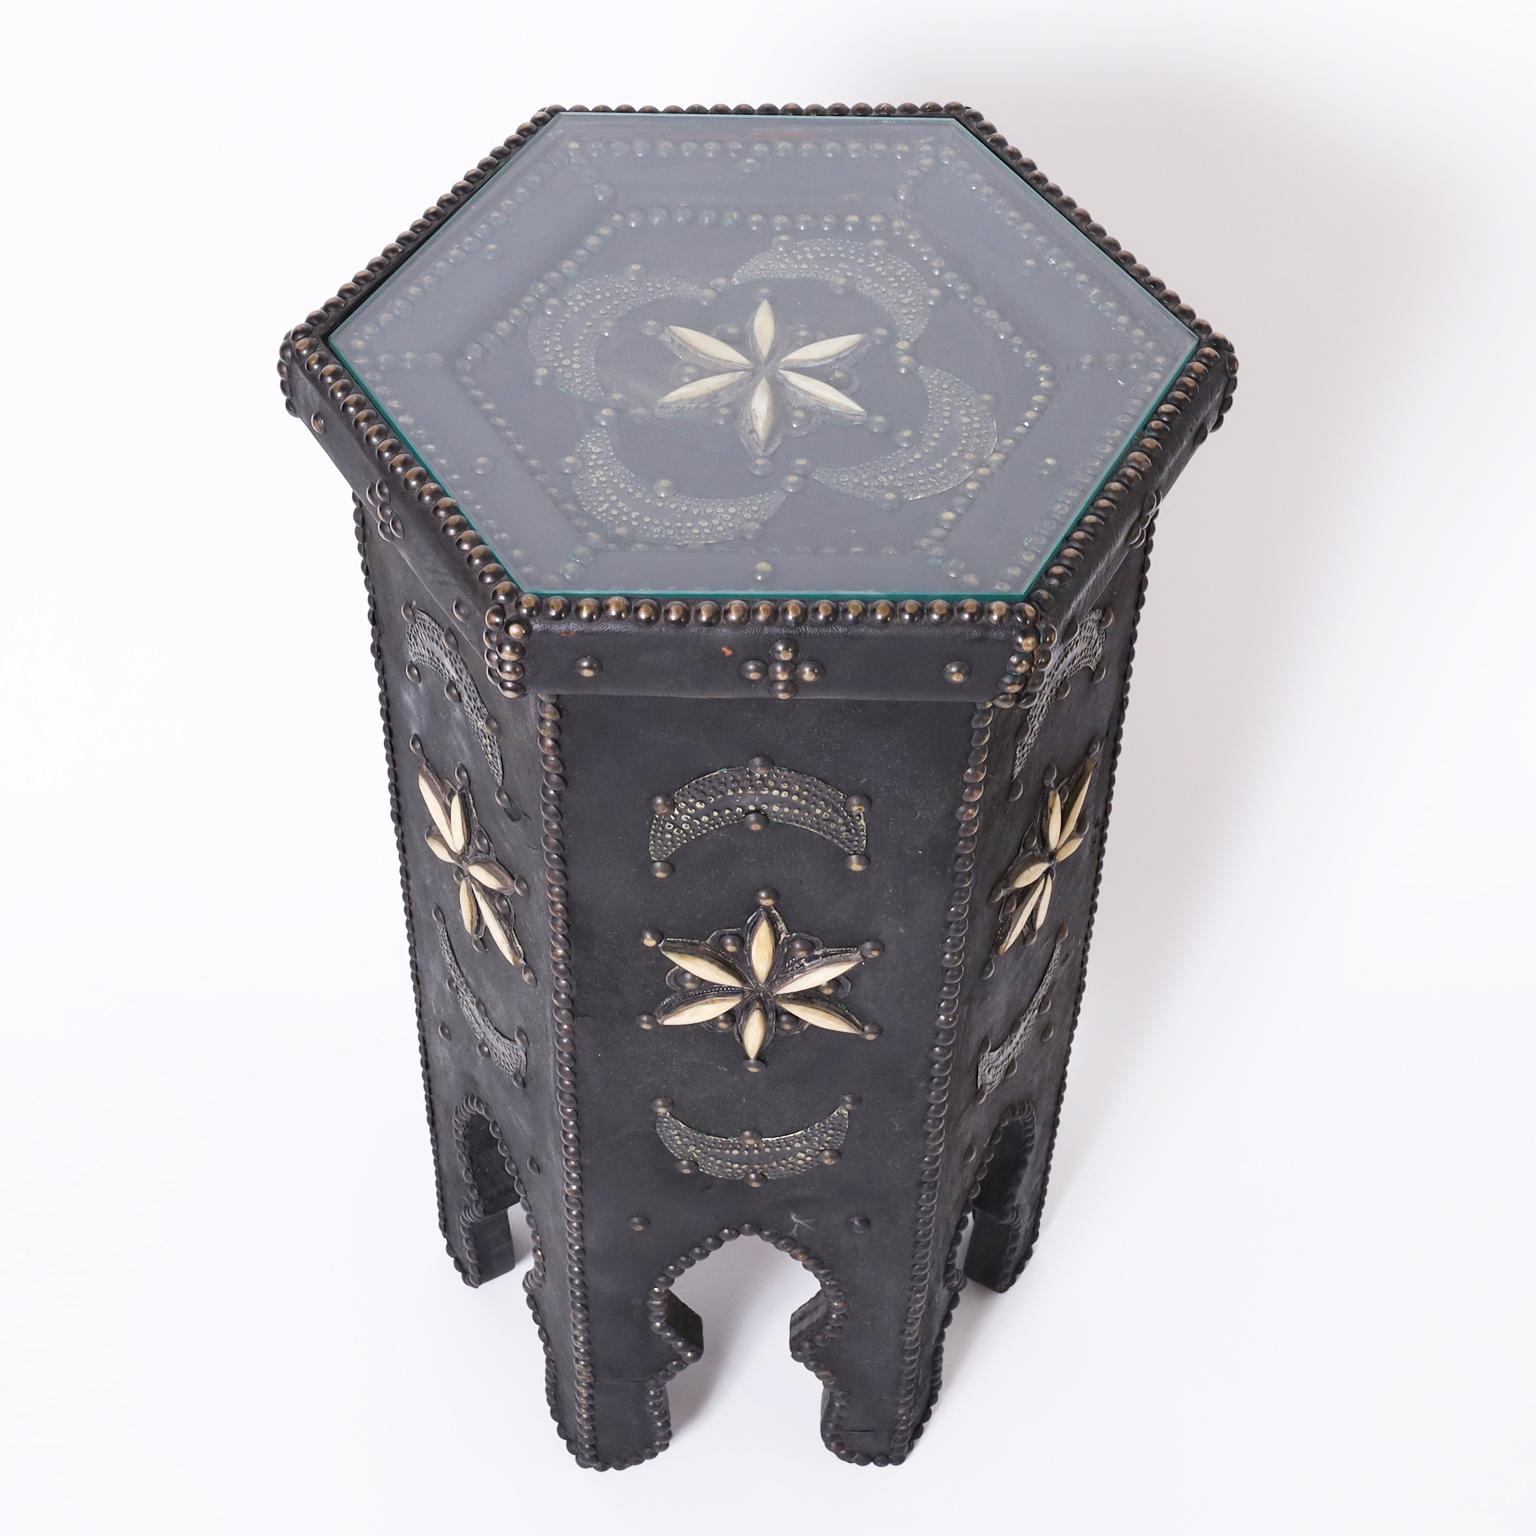 Rare antique Moroccan stand having a hexagon form entirely clad in leather decorated with brass tacks, crescent moons, and bone stars on six legs with moorish arches.